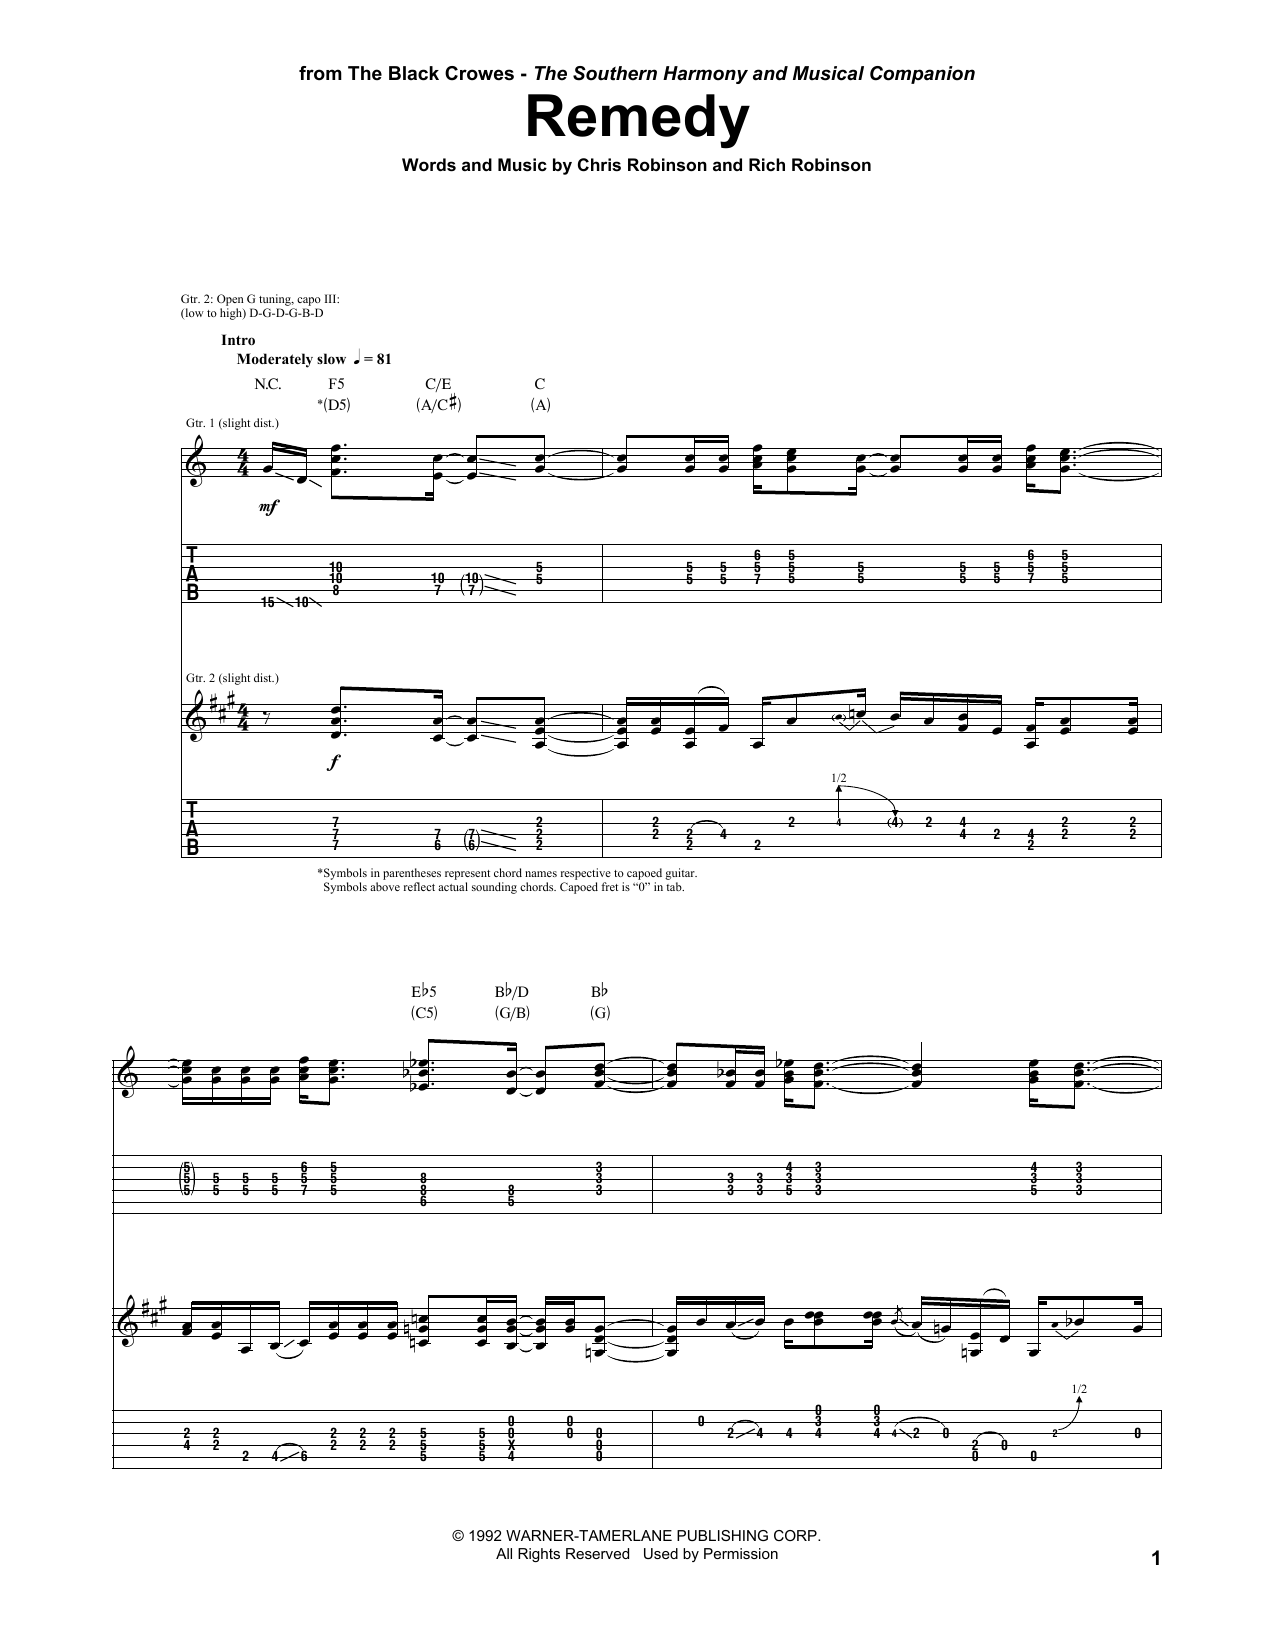 Download The Black Crowes Remedy Sheet Music